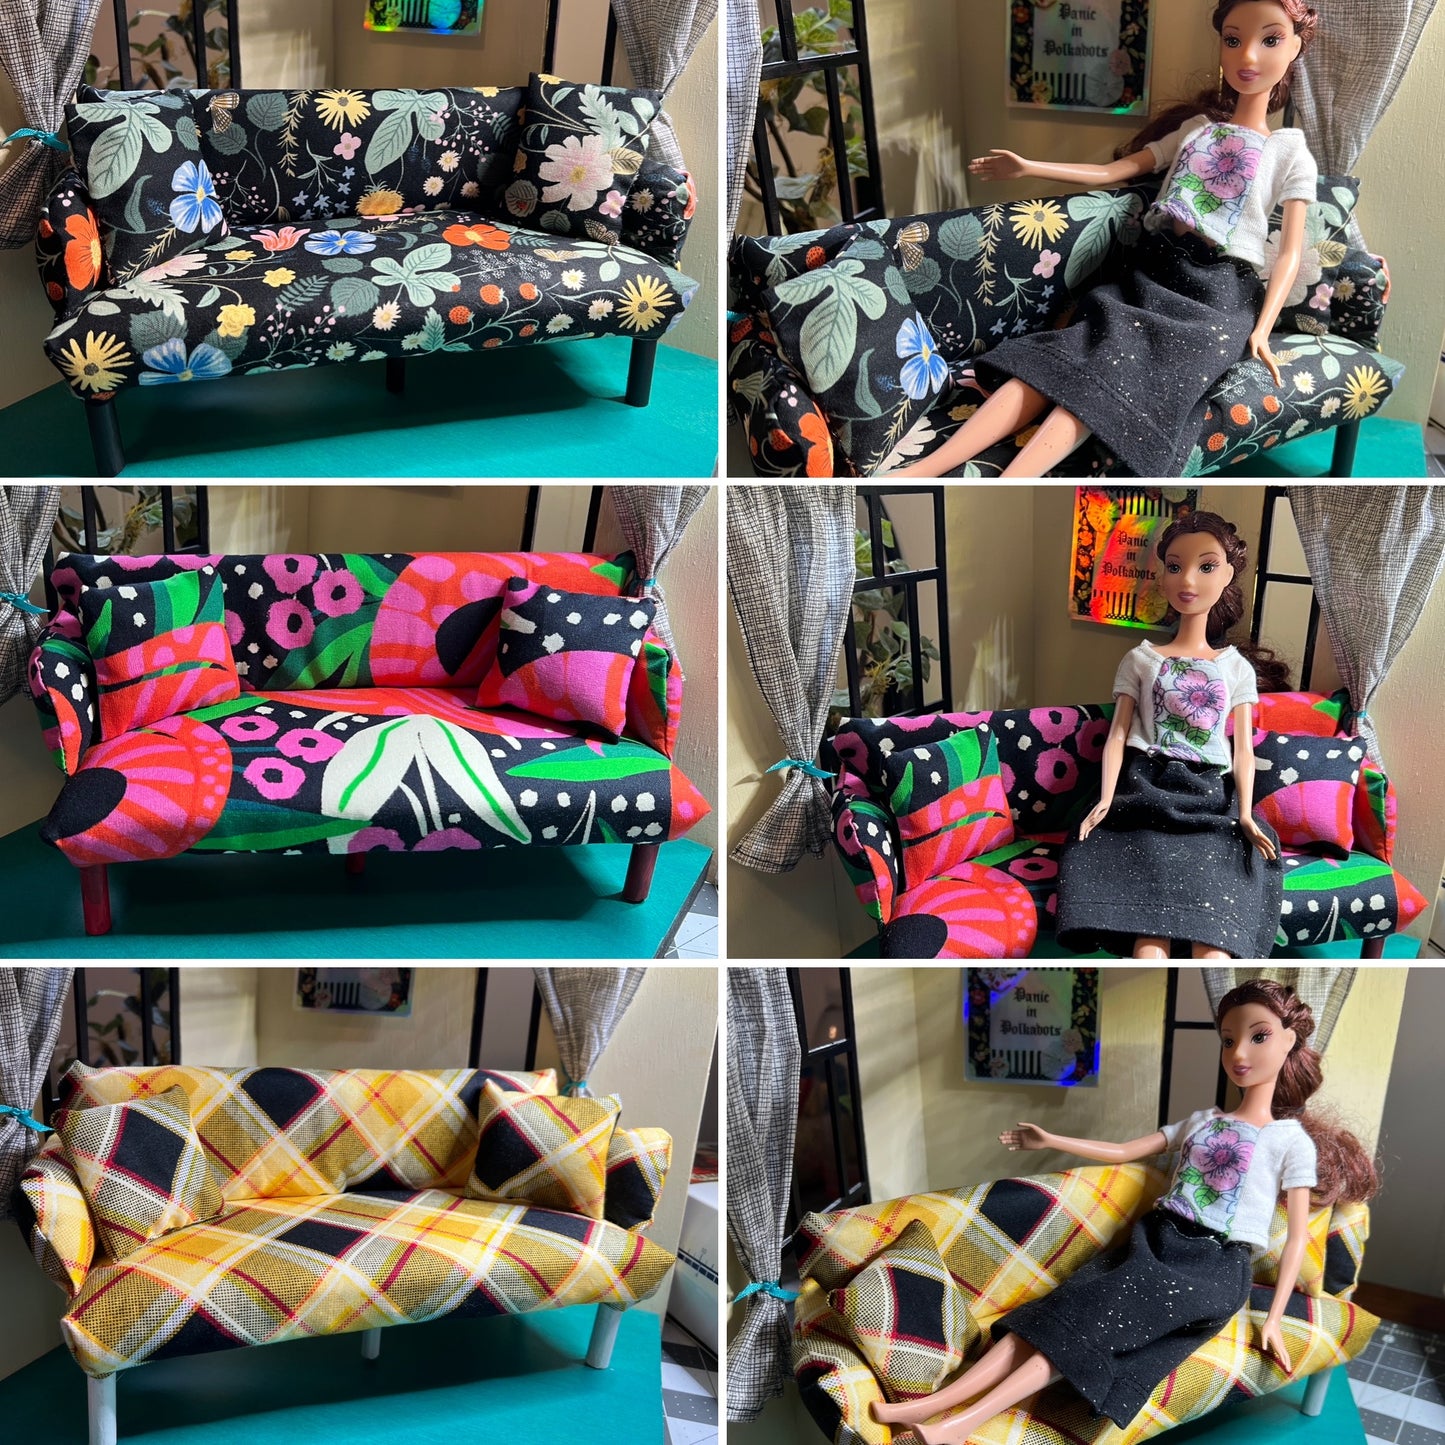 Barbie doll couches, 1:6 scale, in a photo grid with Barbie modeling in each picture to the right.